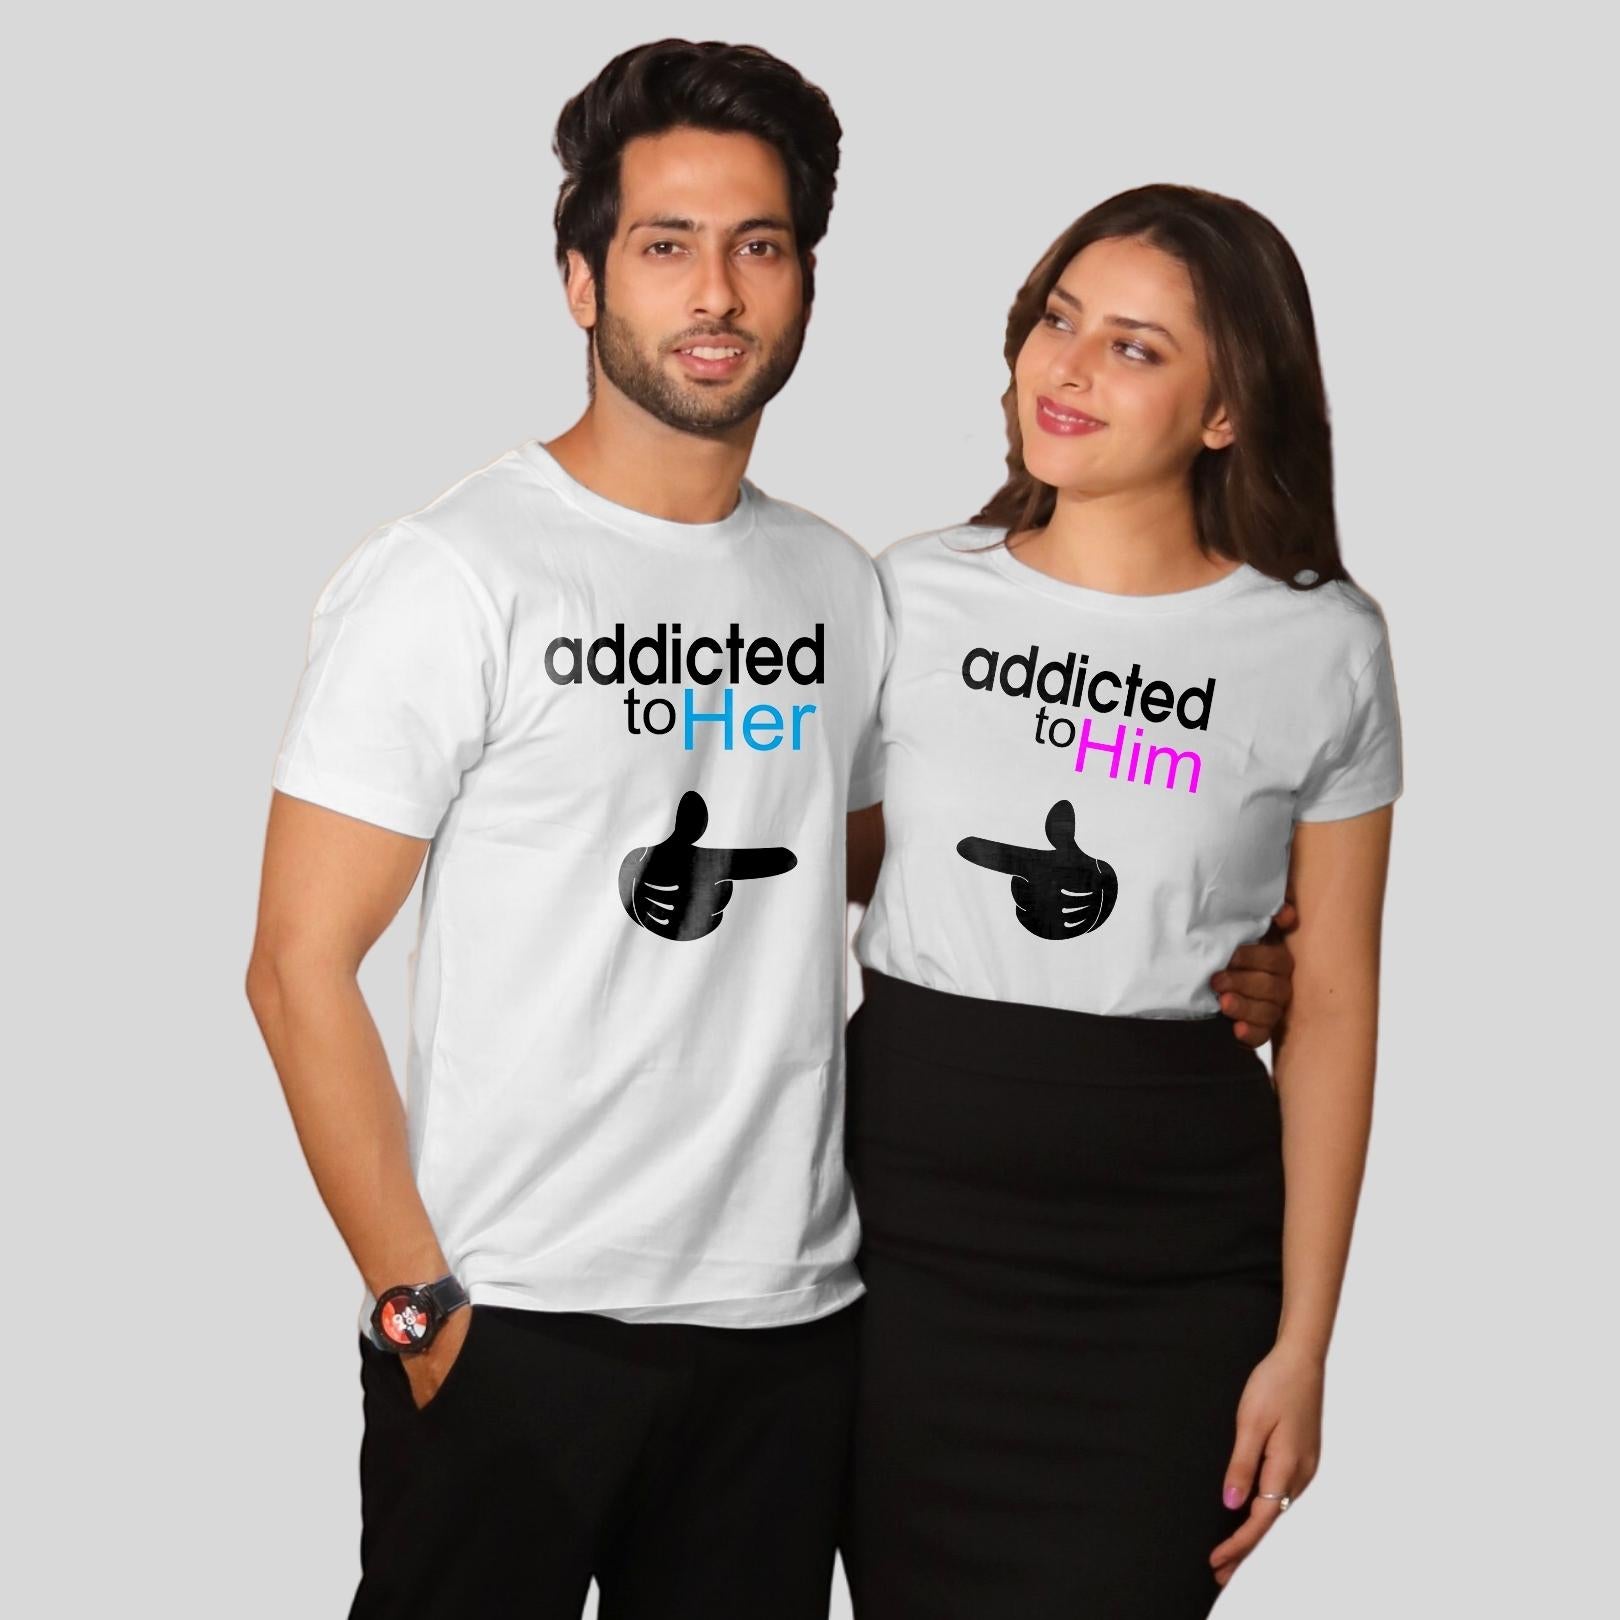 Couple T Shirt In White Colour - Addicted To Her Addicted To Him Variant